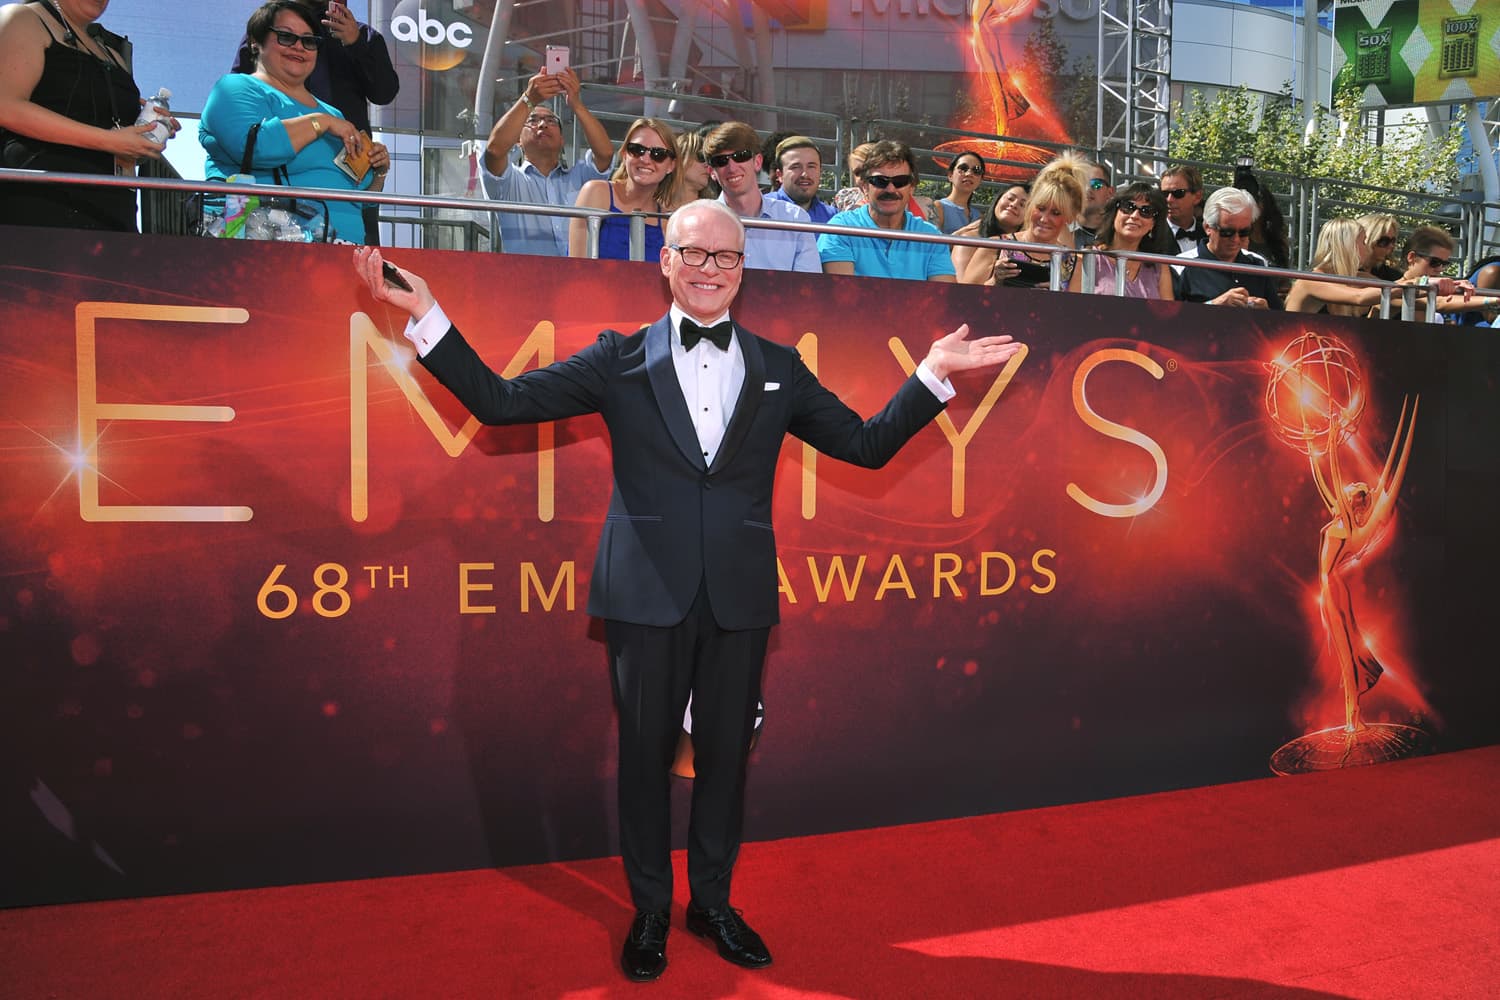 Tim Gunn arrives at the 68th Primetime Emmy Awards on Sunday, Sept. 18, 2016, at the Microsoft Theater in Los Angeles. (Vince Bucc/AP)